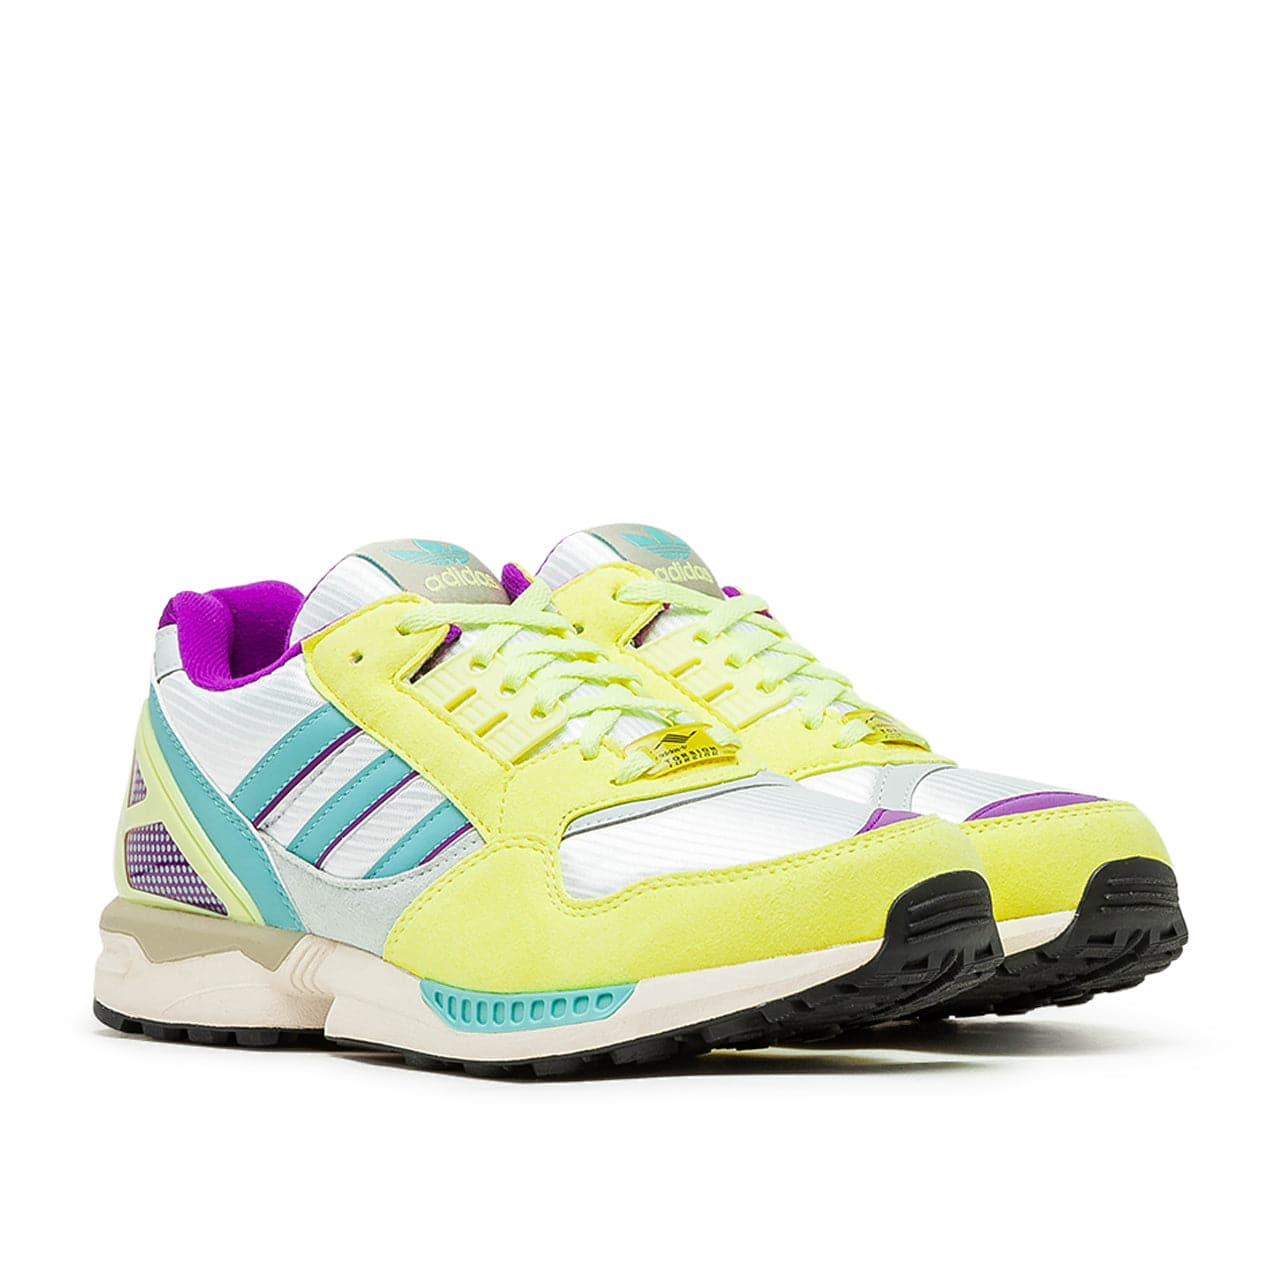 adidas ZX 9000 Citrus 'Bring Back Pack' (Yellow / Green / Purple 